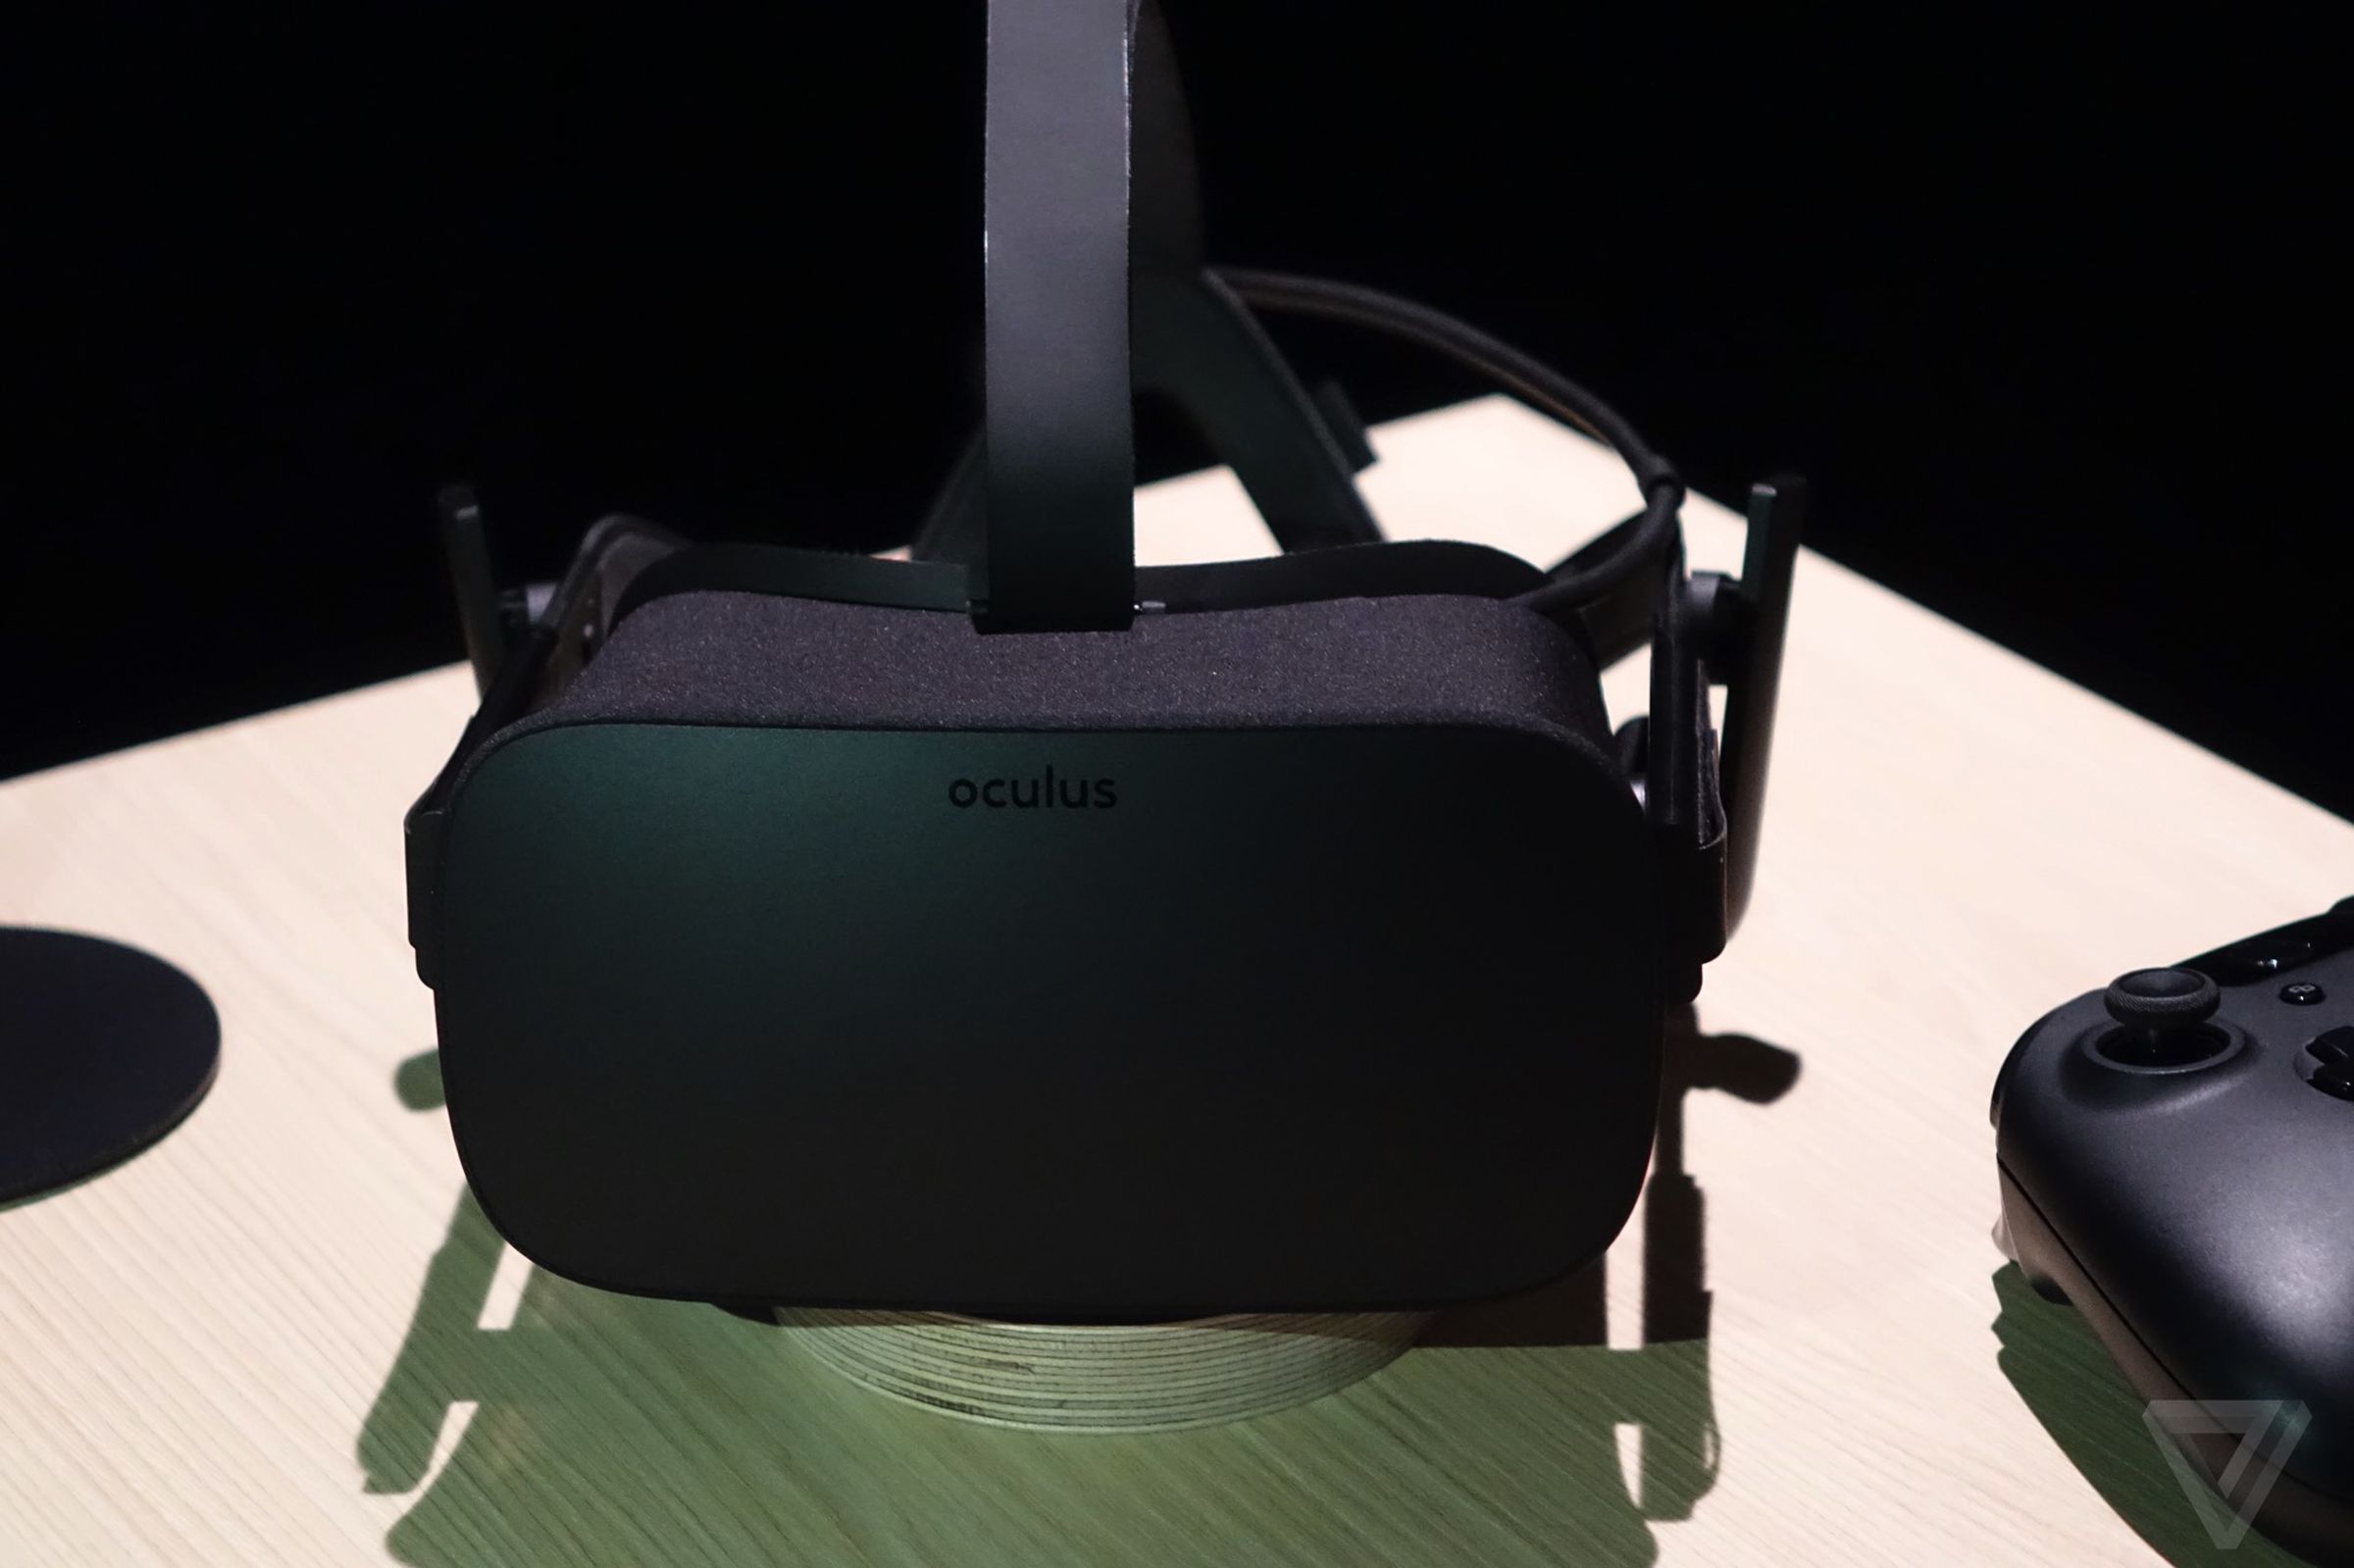 Up close with the Oculus Rift and Oculus Touch